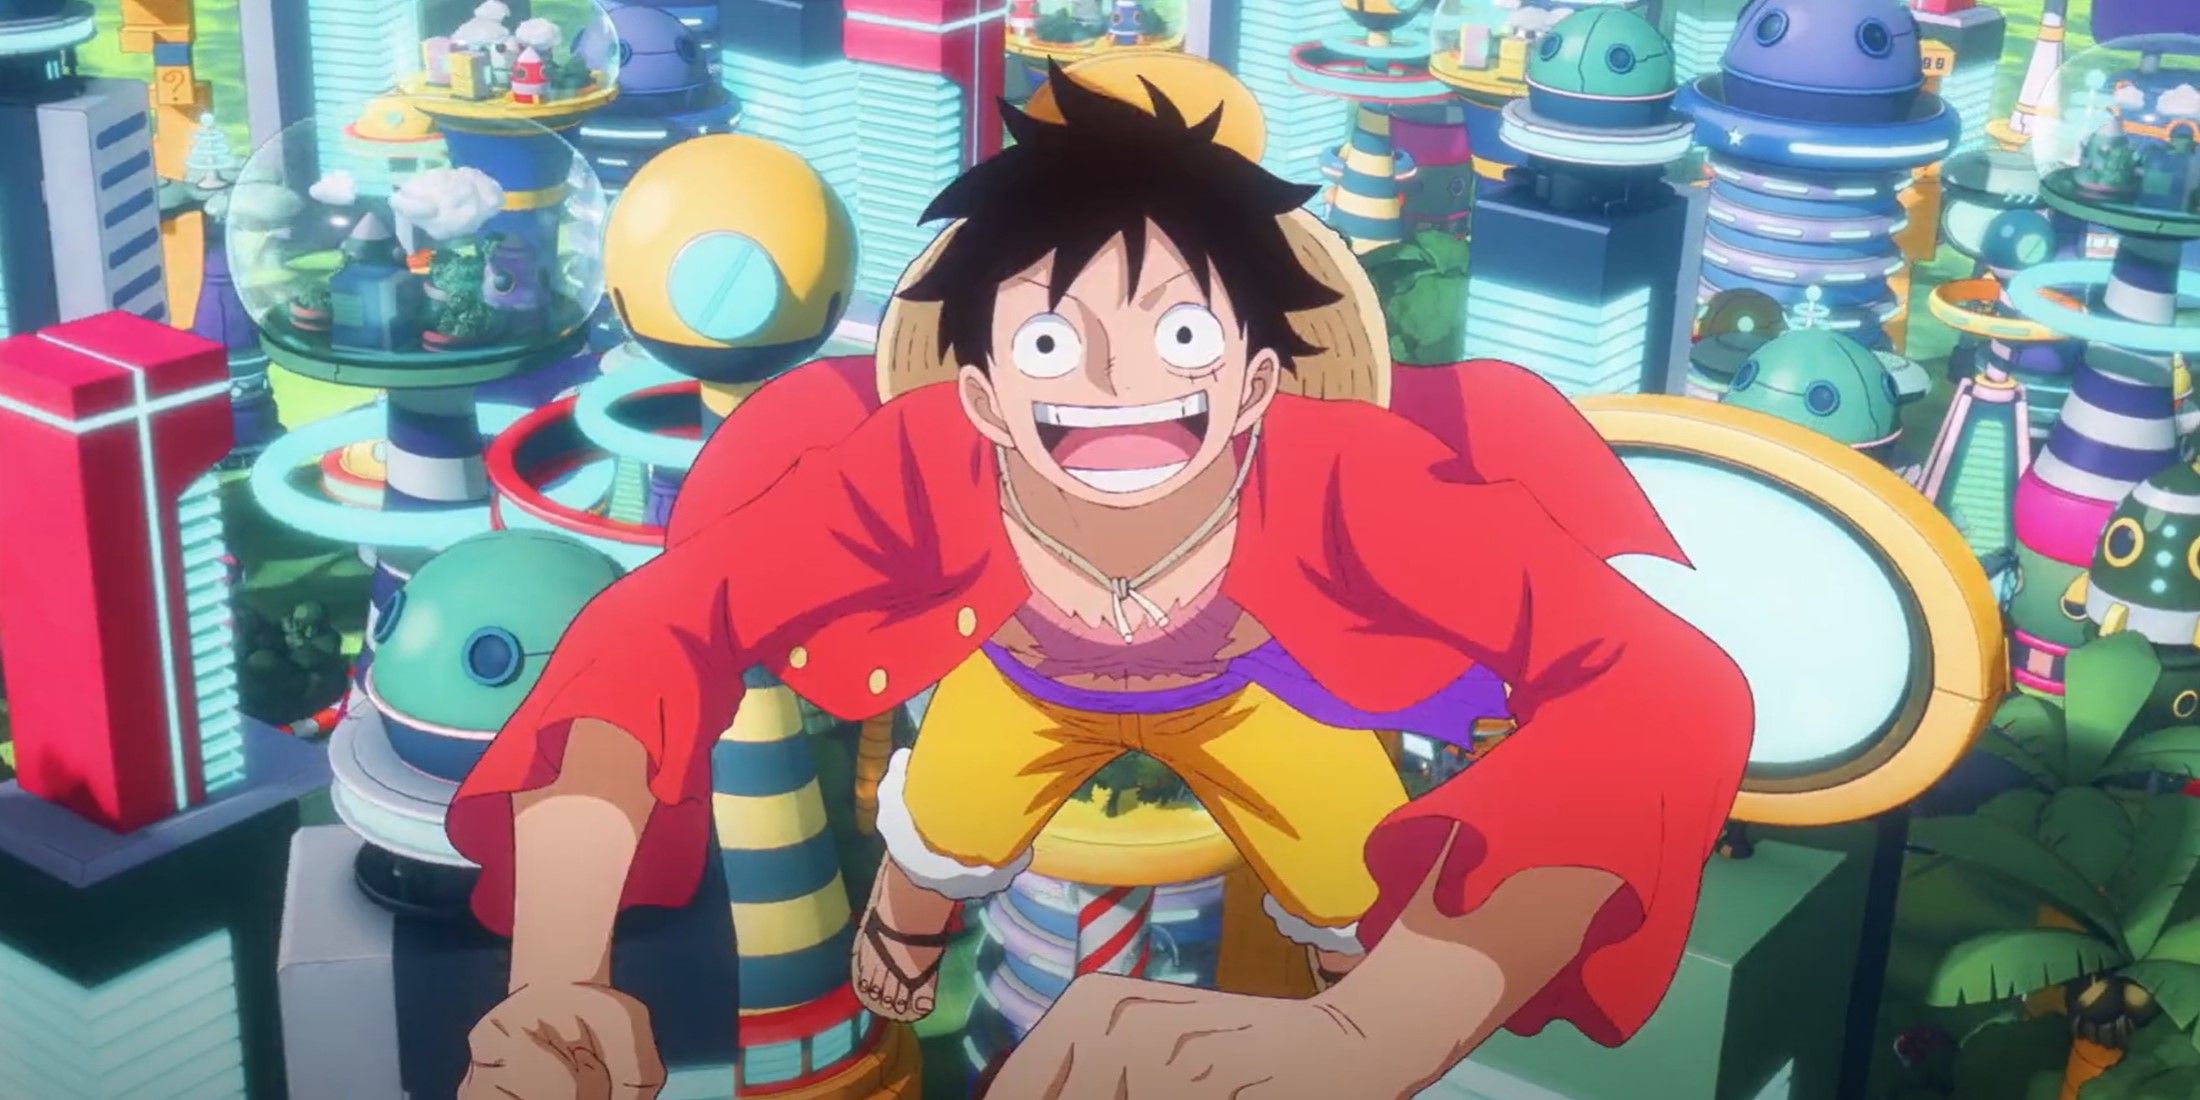 First Look Images For Netflix's New ONE PIECE Anime Series